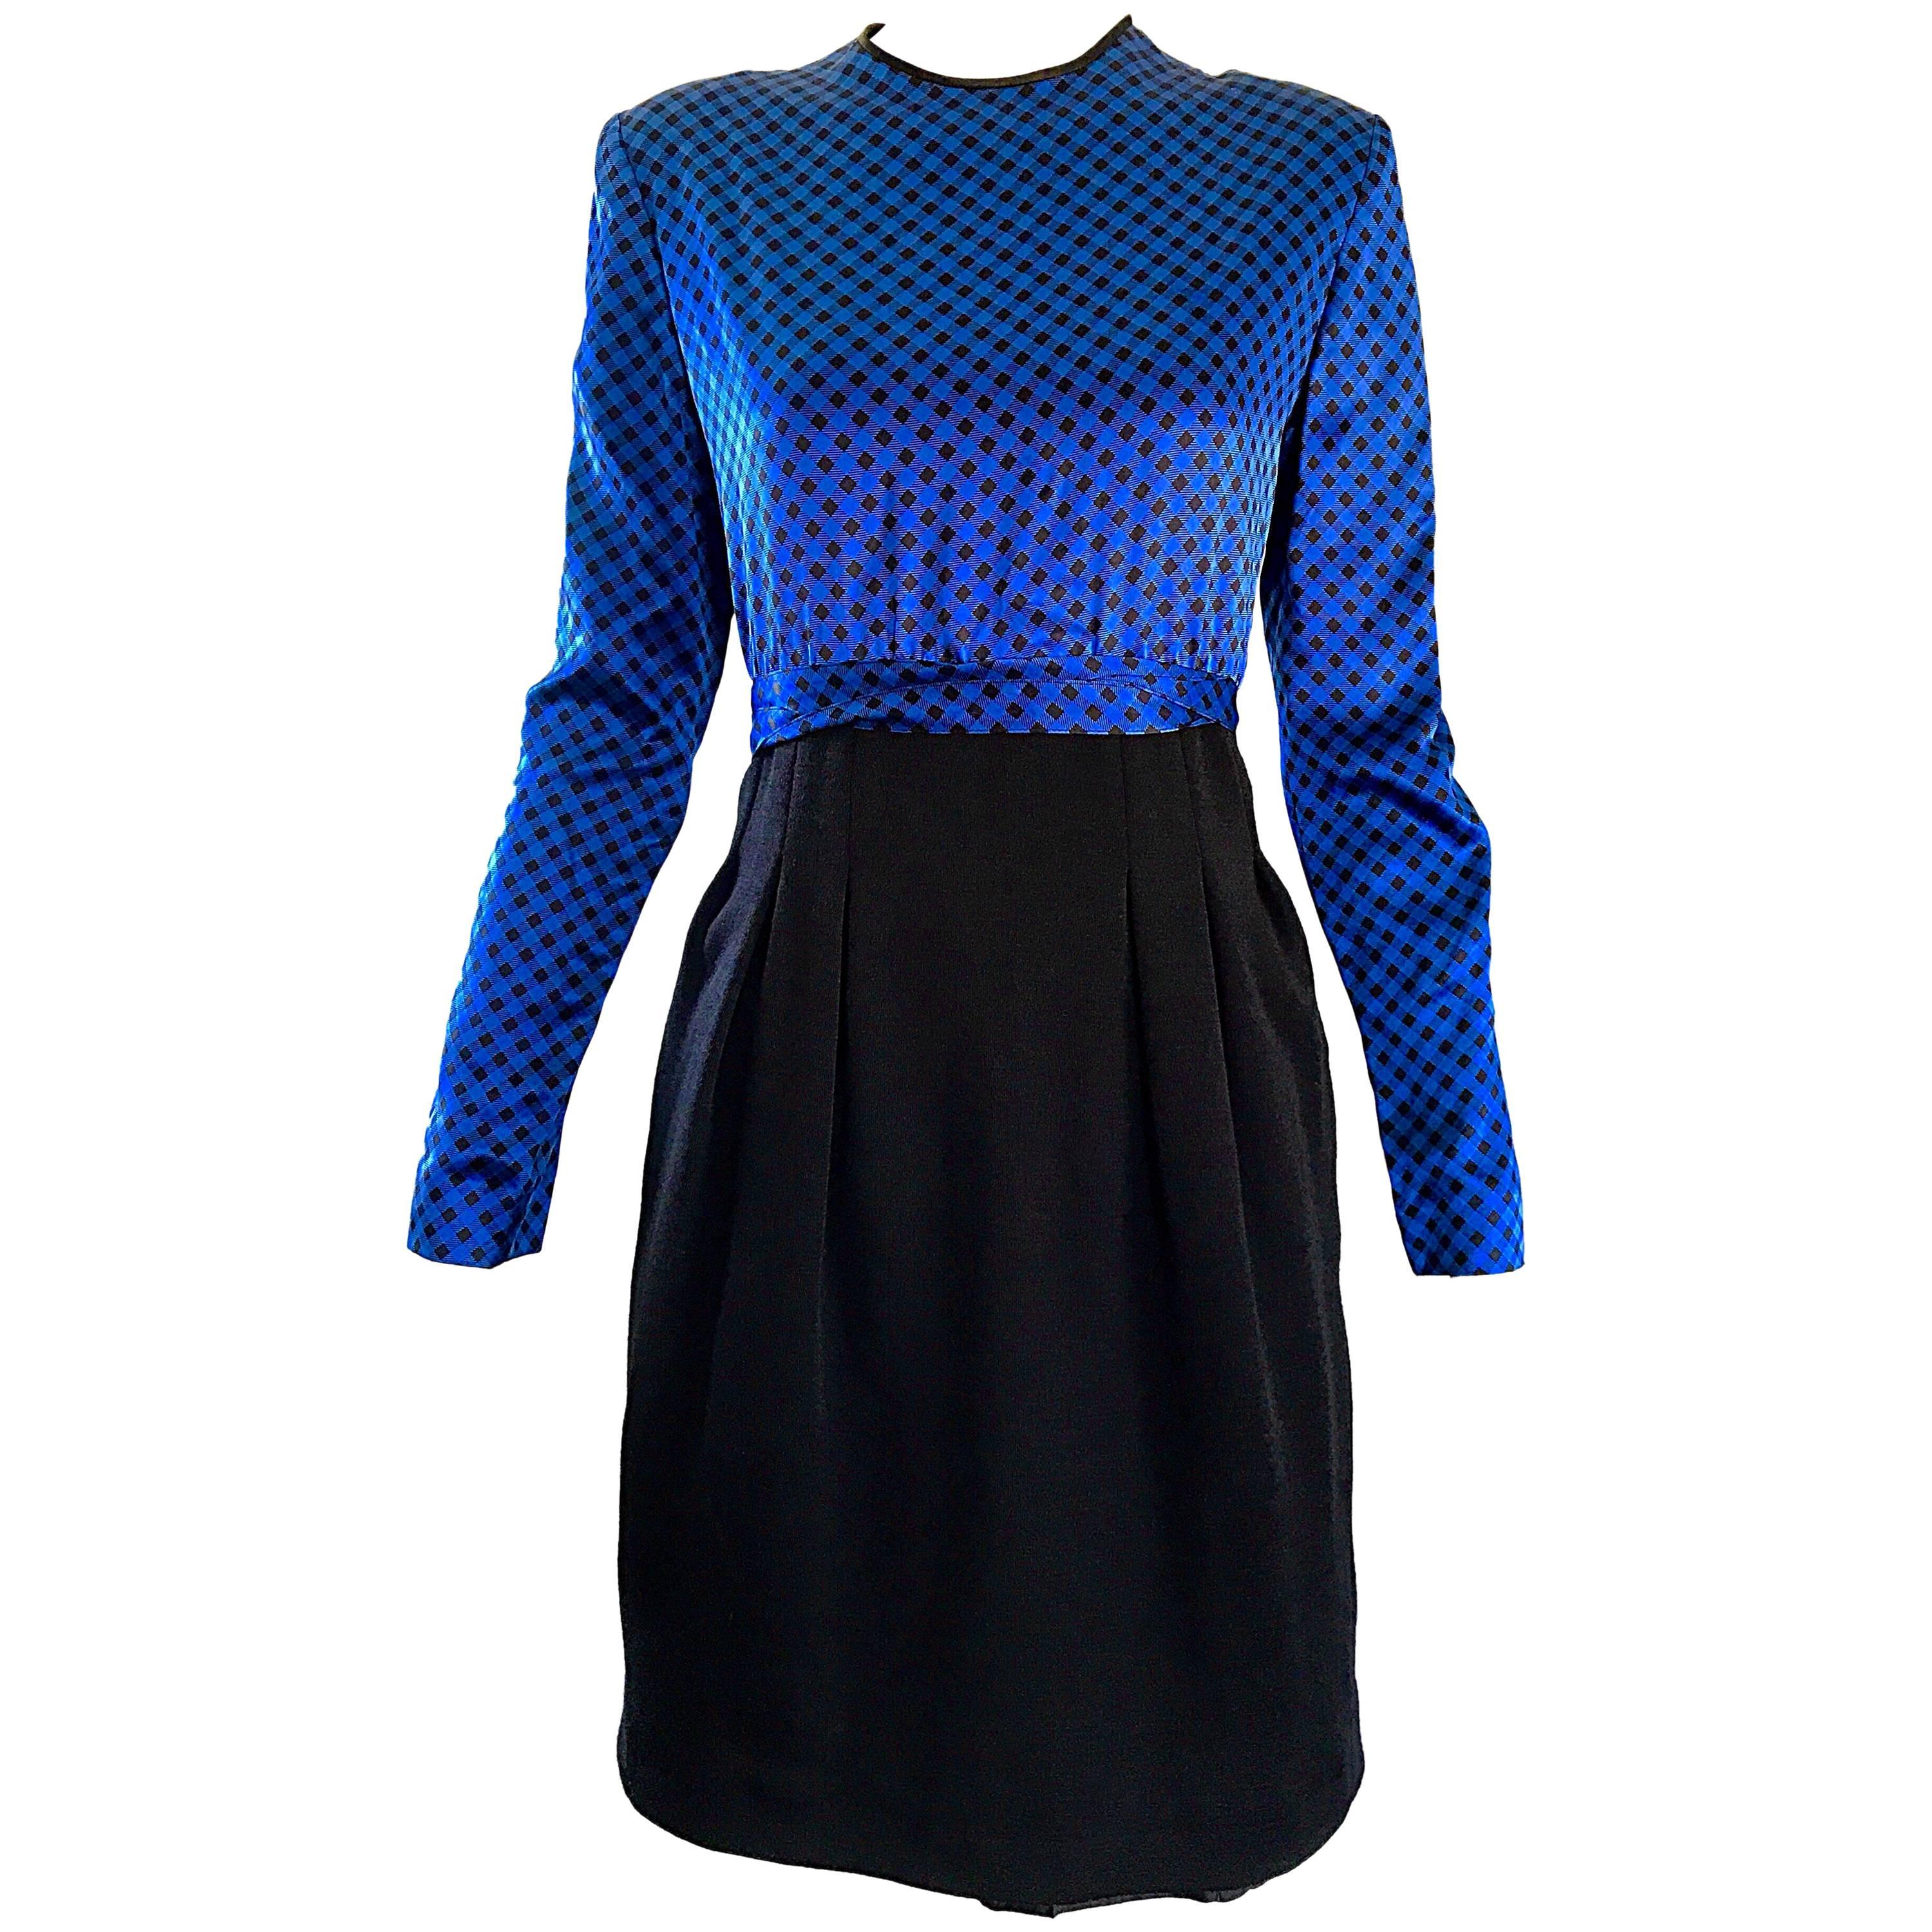 NWT 1990s Geoffrey Beene Size 10 Royal Blue Black Gingham Long Sleeve Dress For Sale